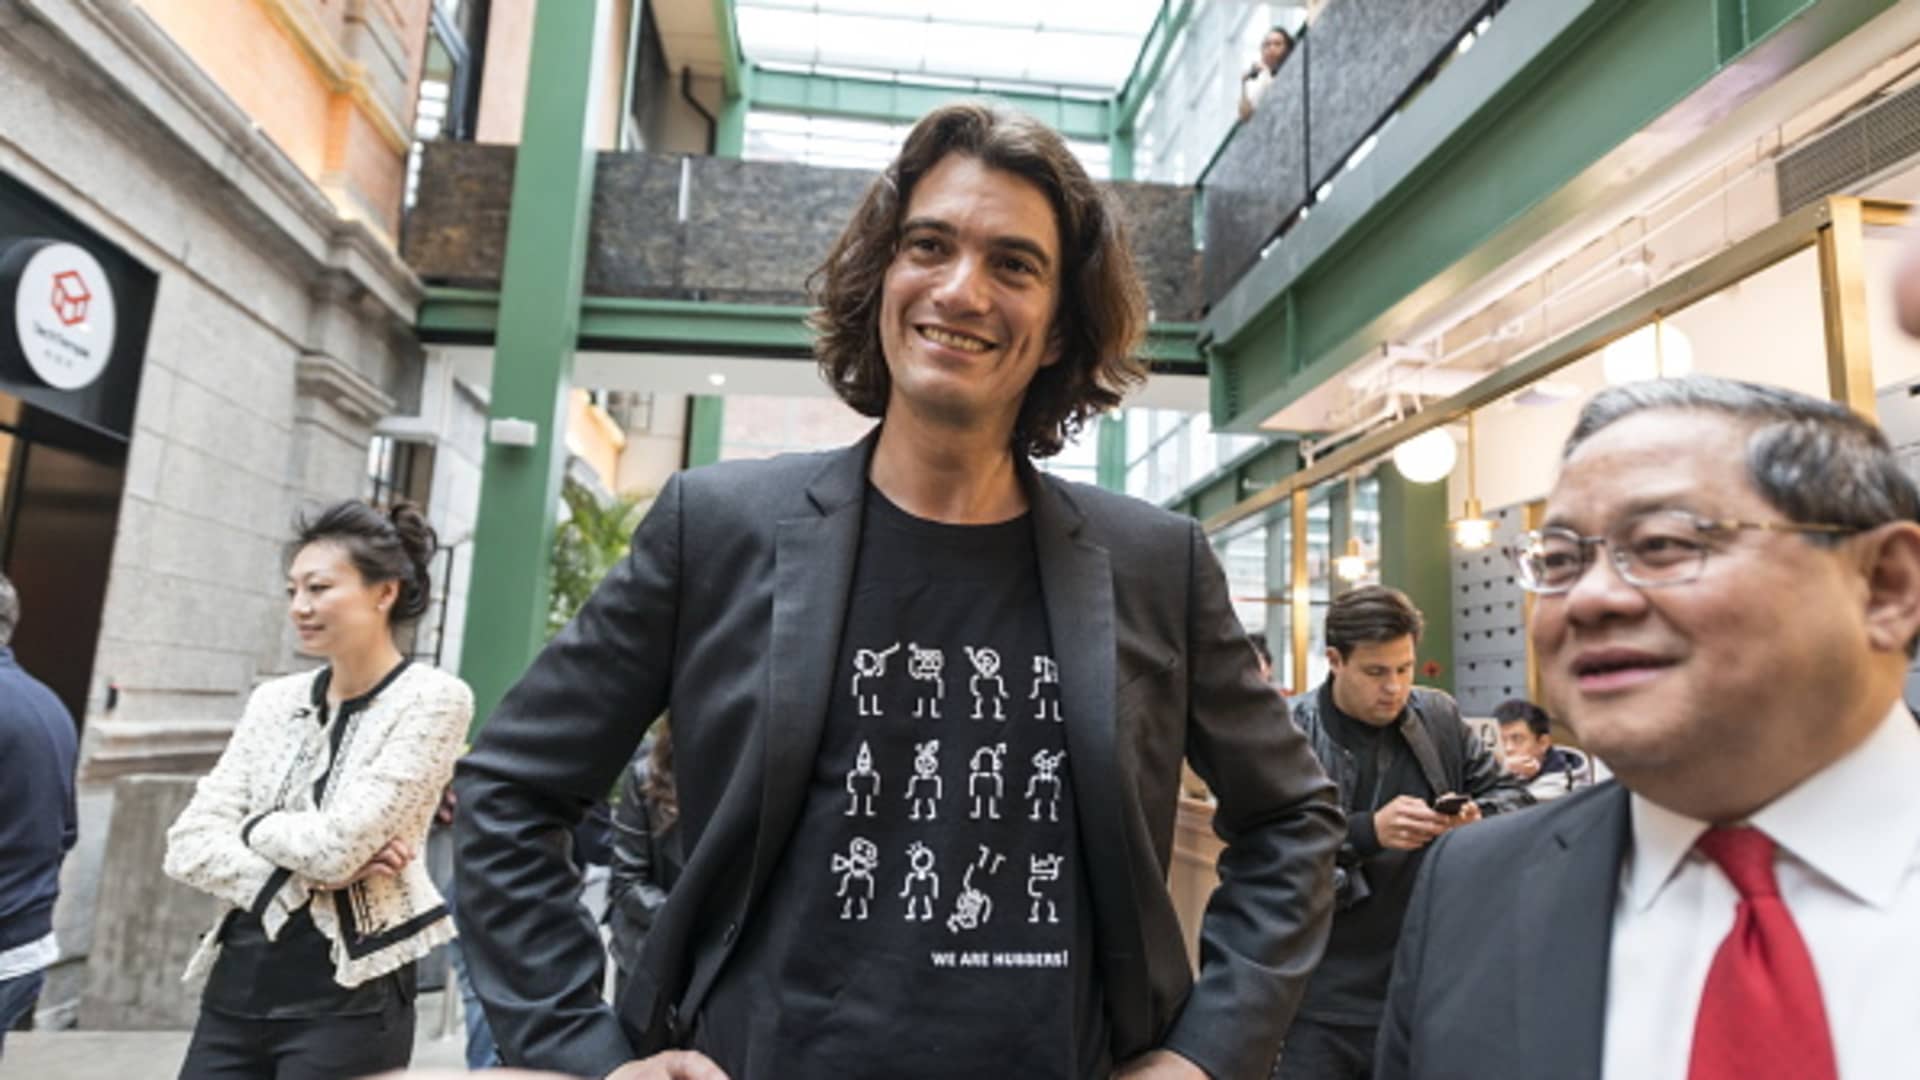 Adam Neumann submits bid of more than 0 million to acquire WeWork